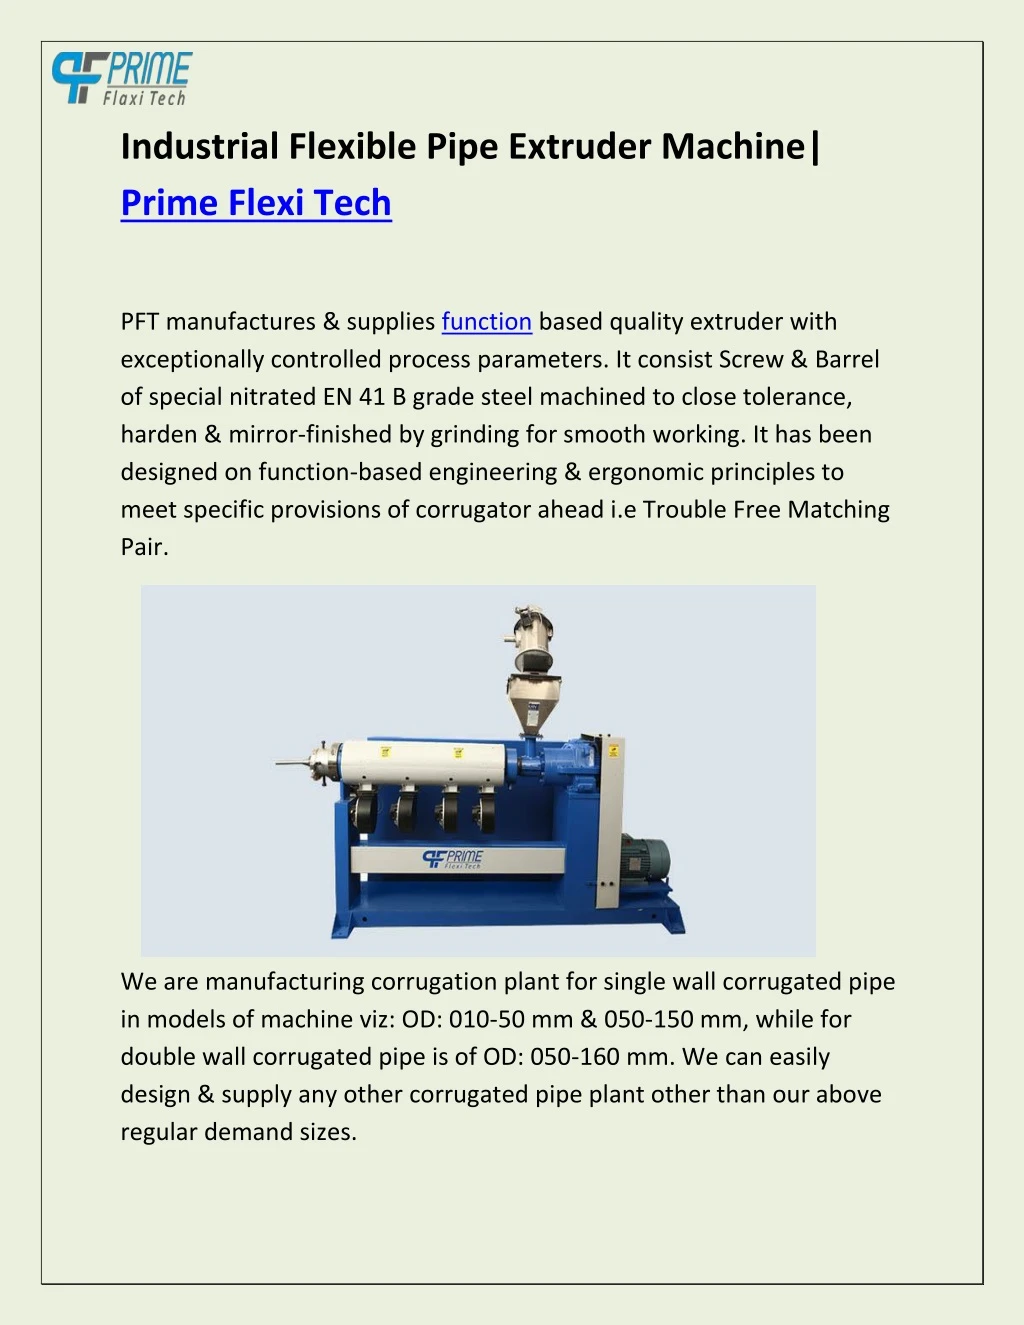 industrial flexible pipe extruder machine prime